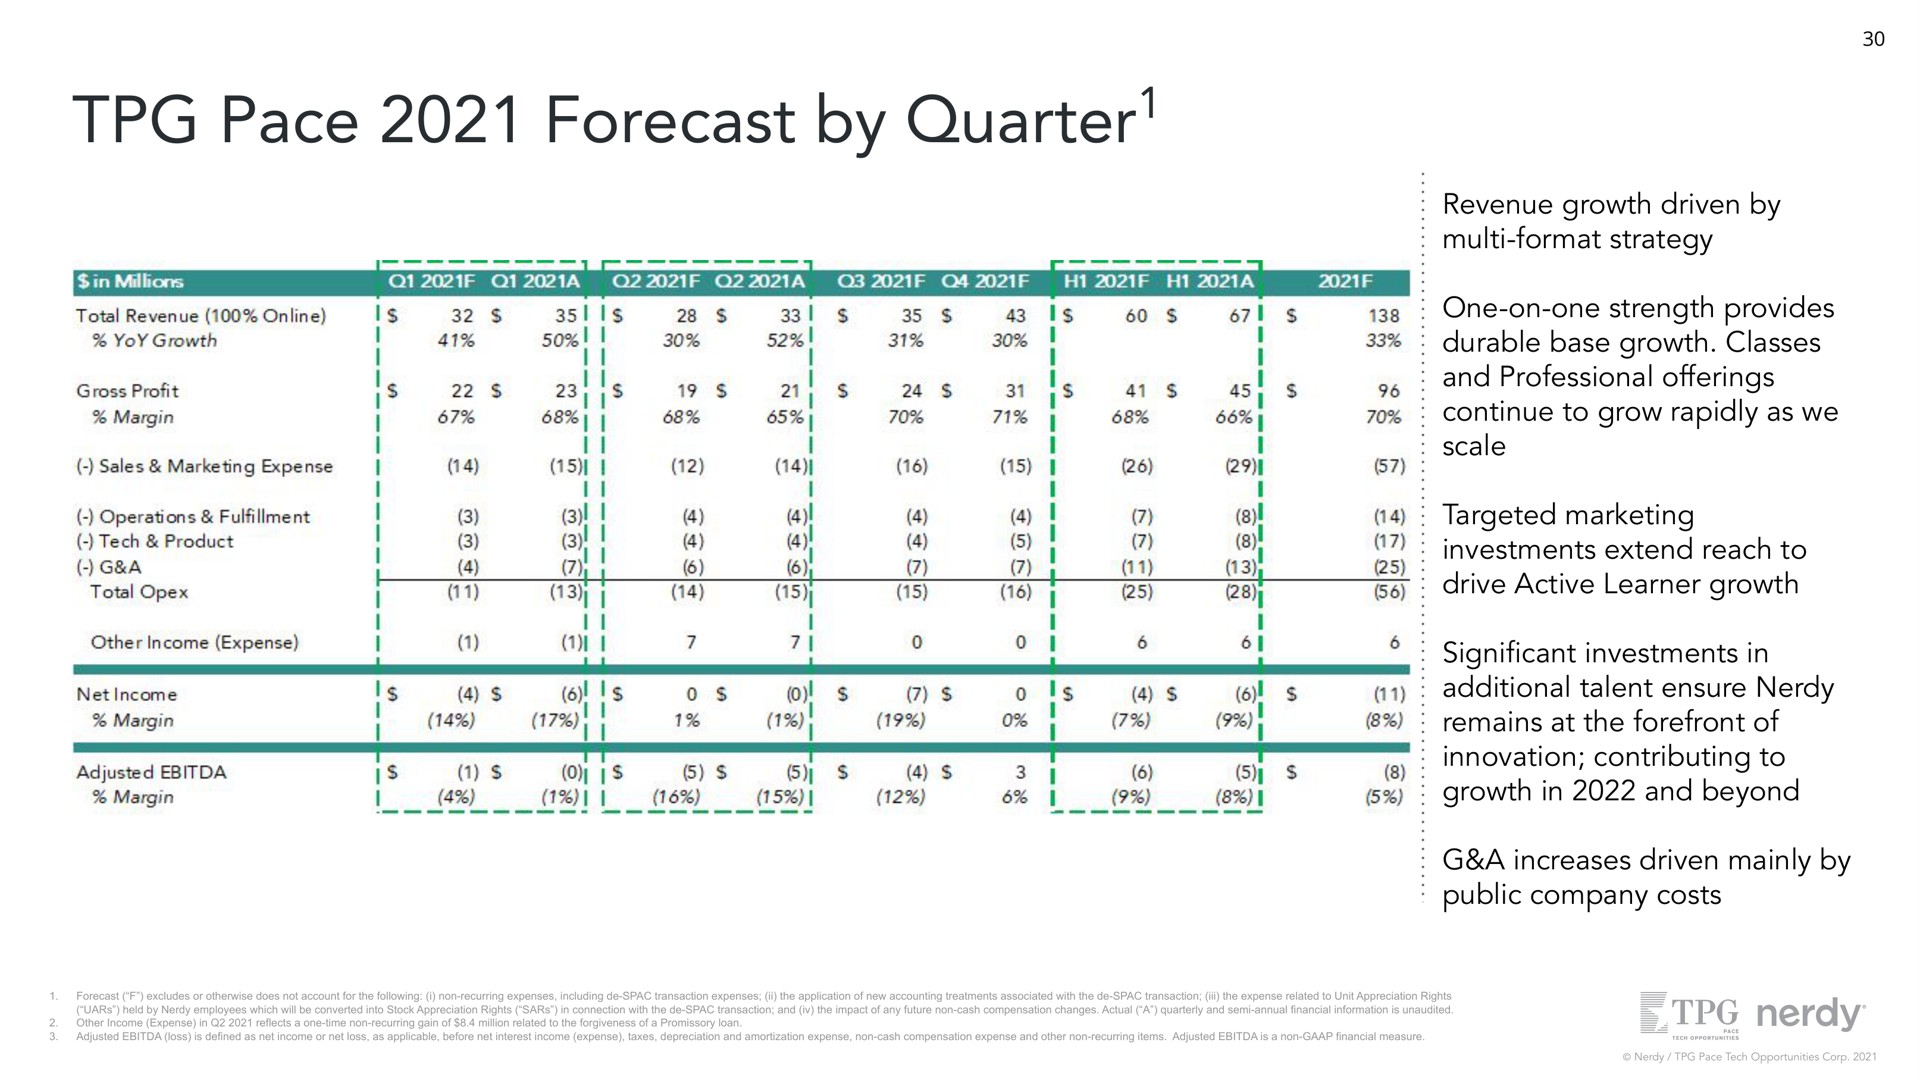 pace forecast by quarter revenue growth driven by format strategy one on one strength provides durable base growth classes and professional offerings continue to grow rapidly as we scale targeted marketing investments extend reach to drive active learner growth cant investments in additional talent ensure remains at the forefront of innovation contributing to growth in and beyond a increases driven mainly by public company costs quarter | Nerdy